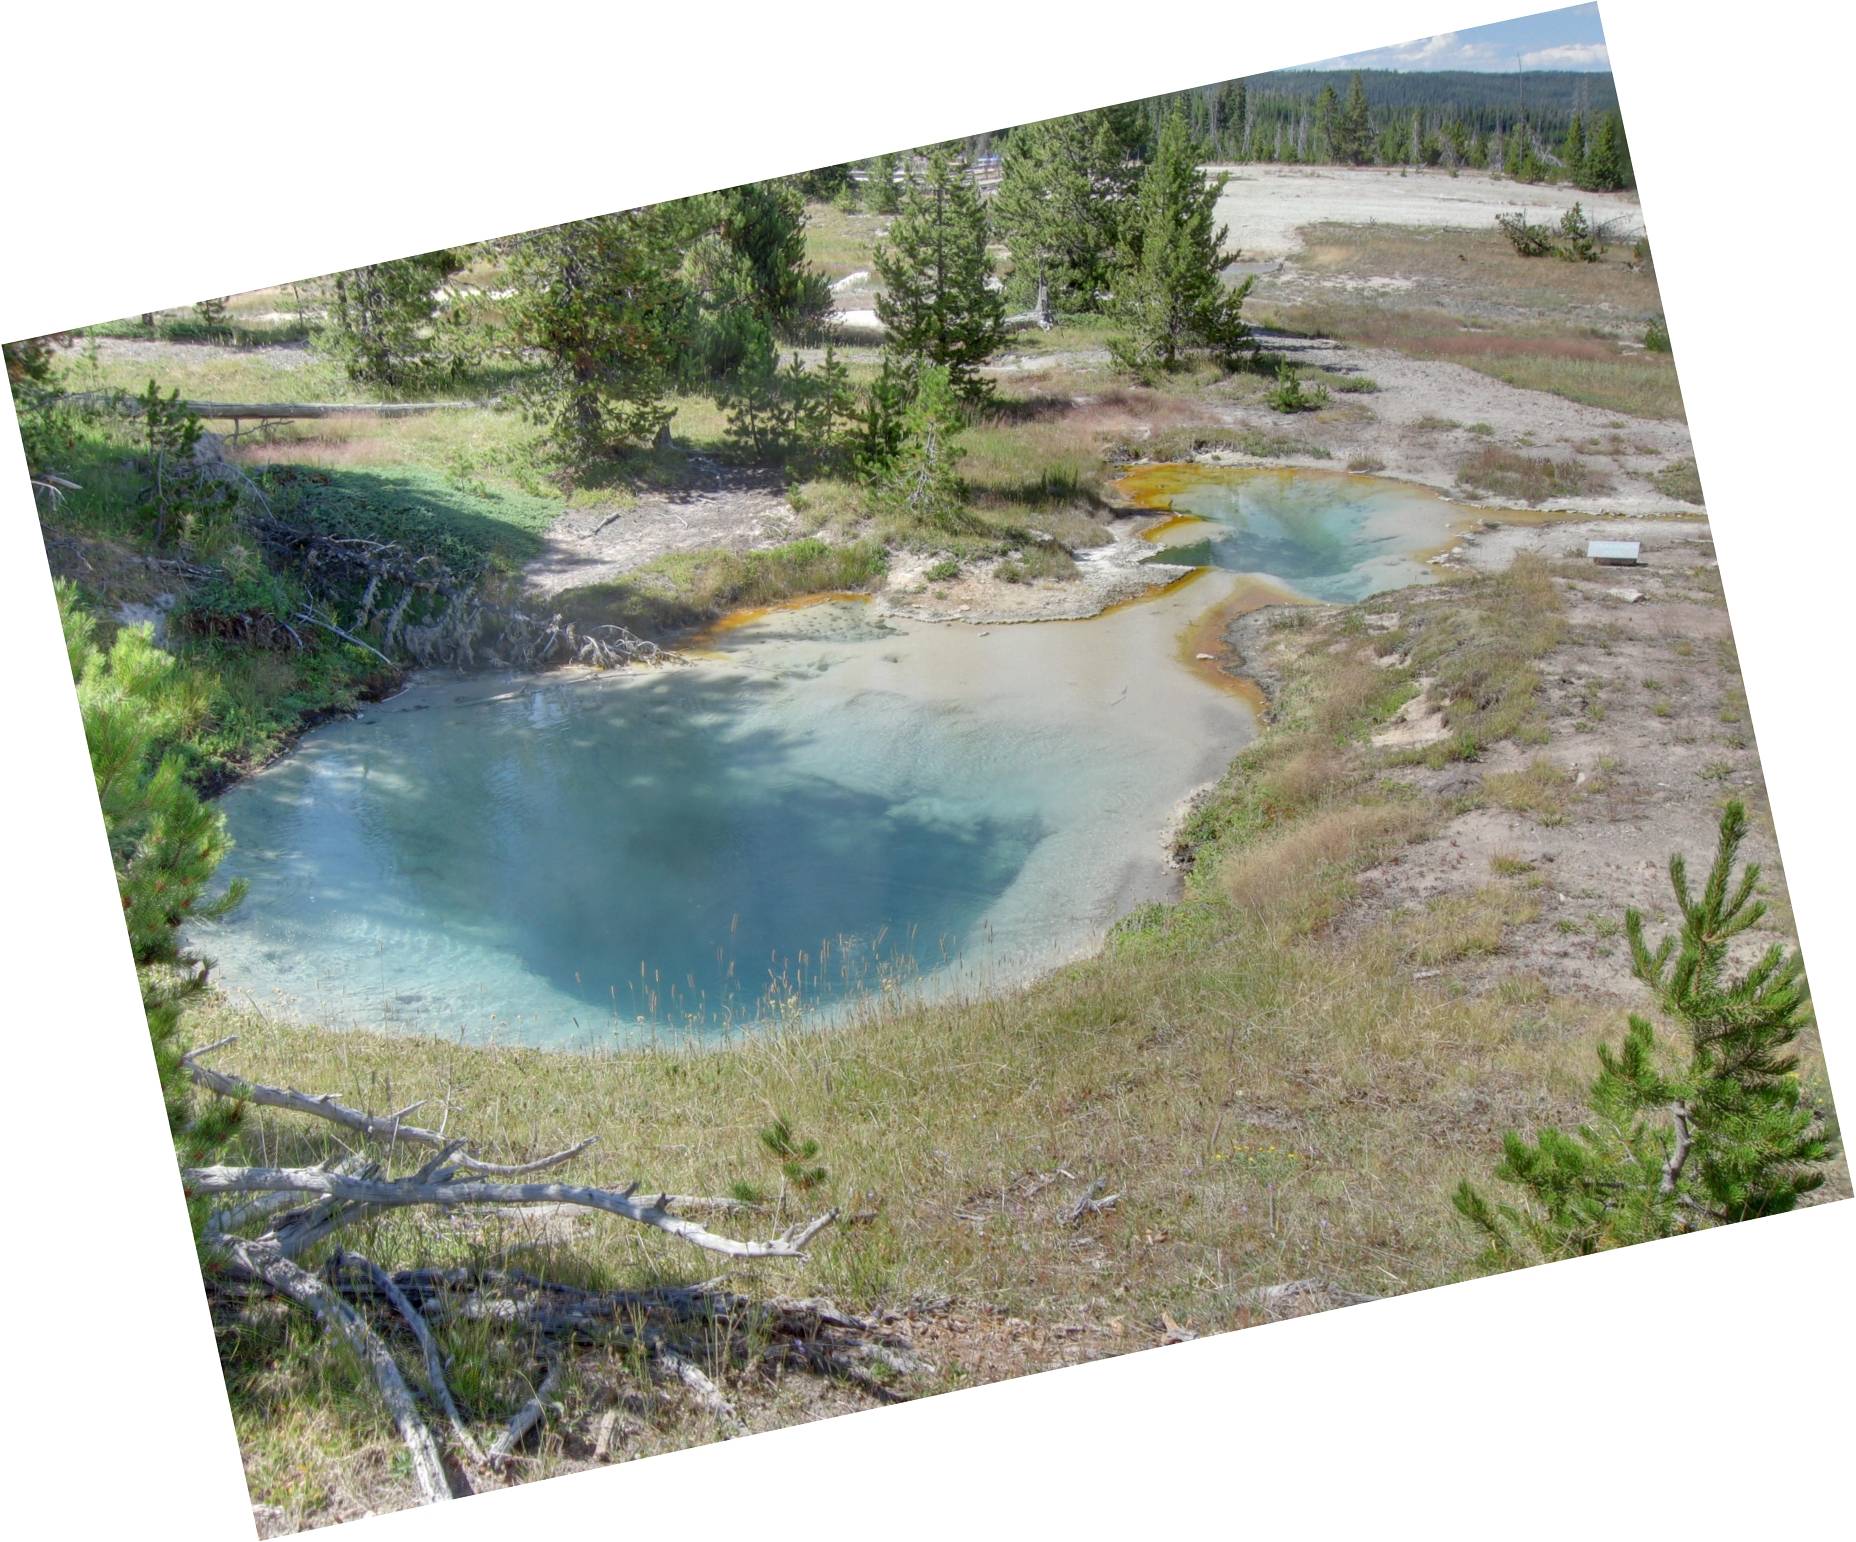 Image: The Bluebell Pool in the West Thumb Geyser Basin